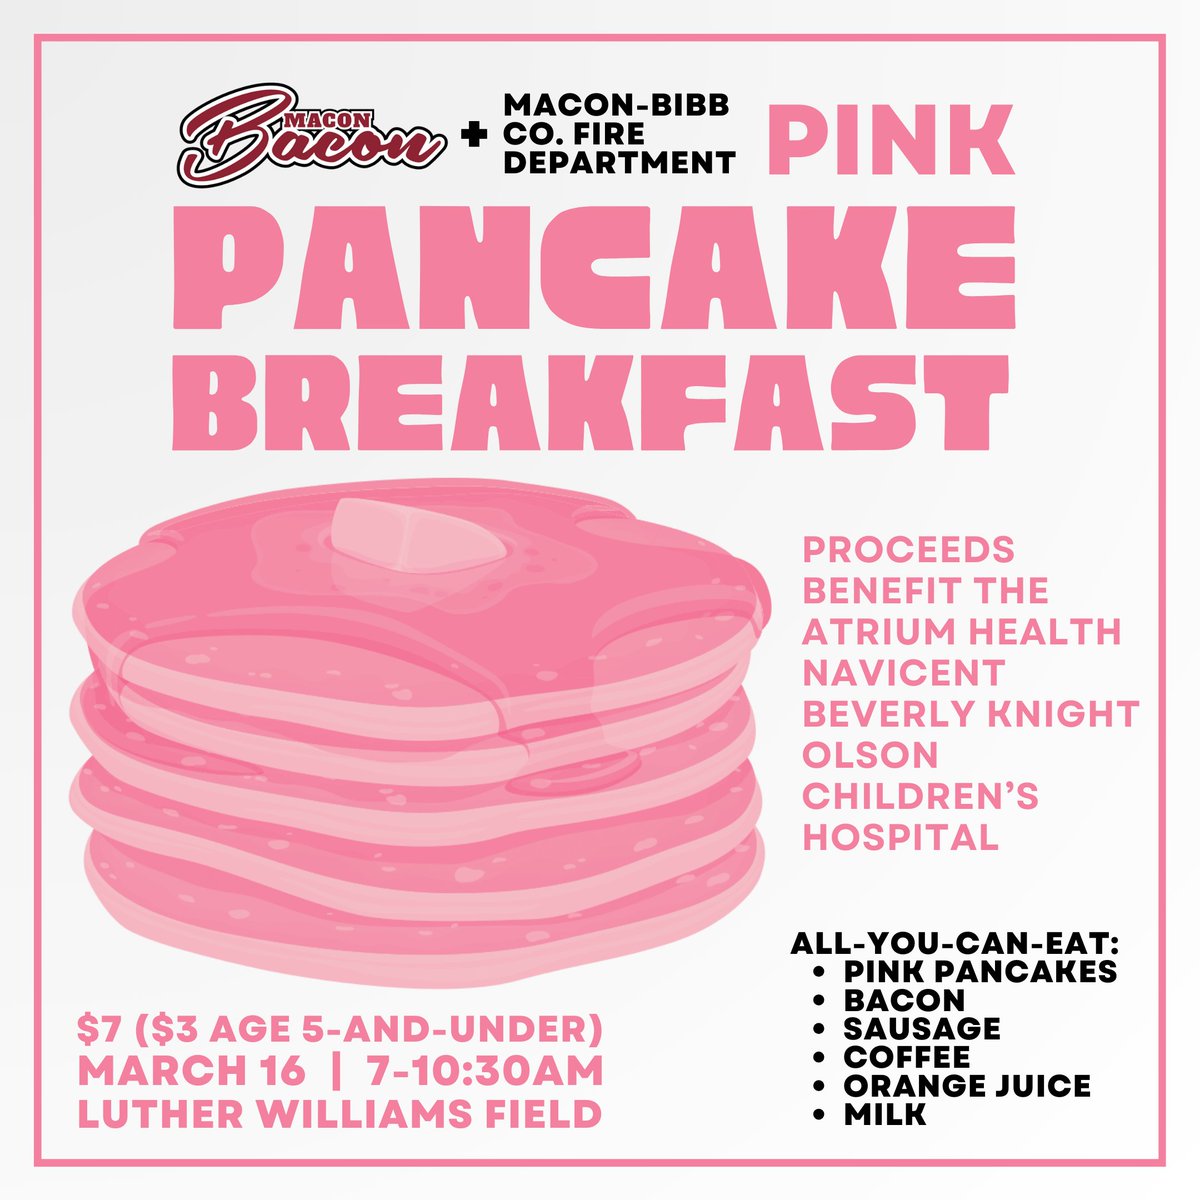 Our Annual Pink Pancake Breakfast is almost here! Come by Luther Williams Field any time from 7am to 10:30am on March 16th or March 23rd for an all-you-can-eat breakfast in support of an incredible cause.